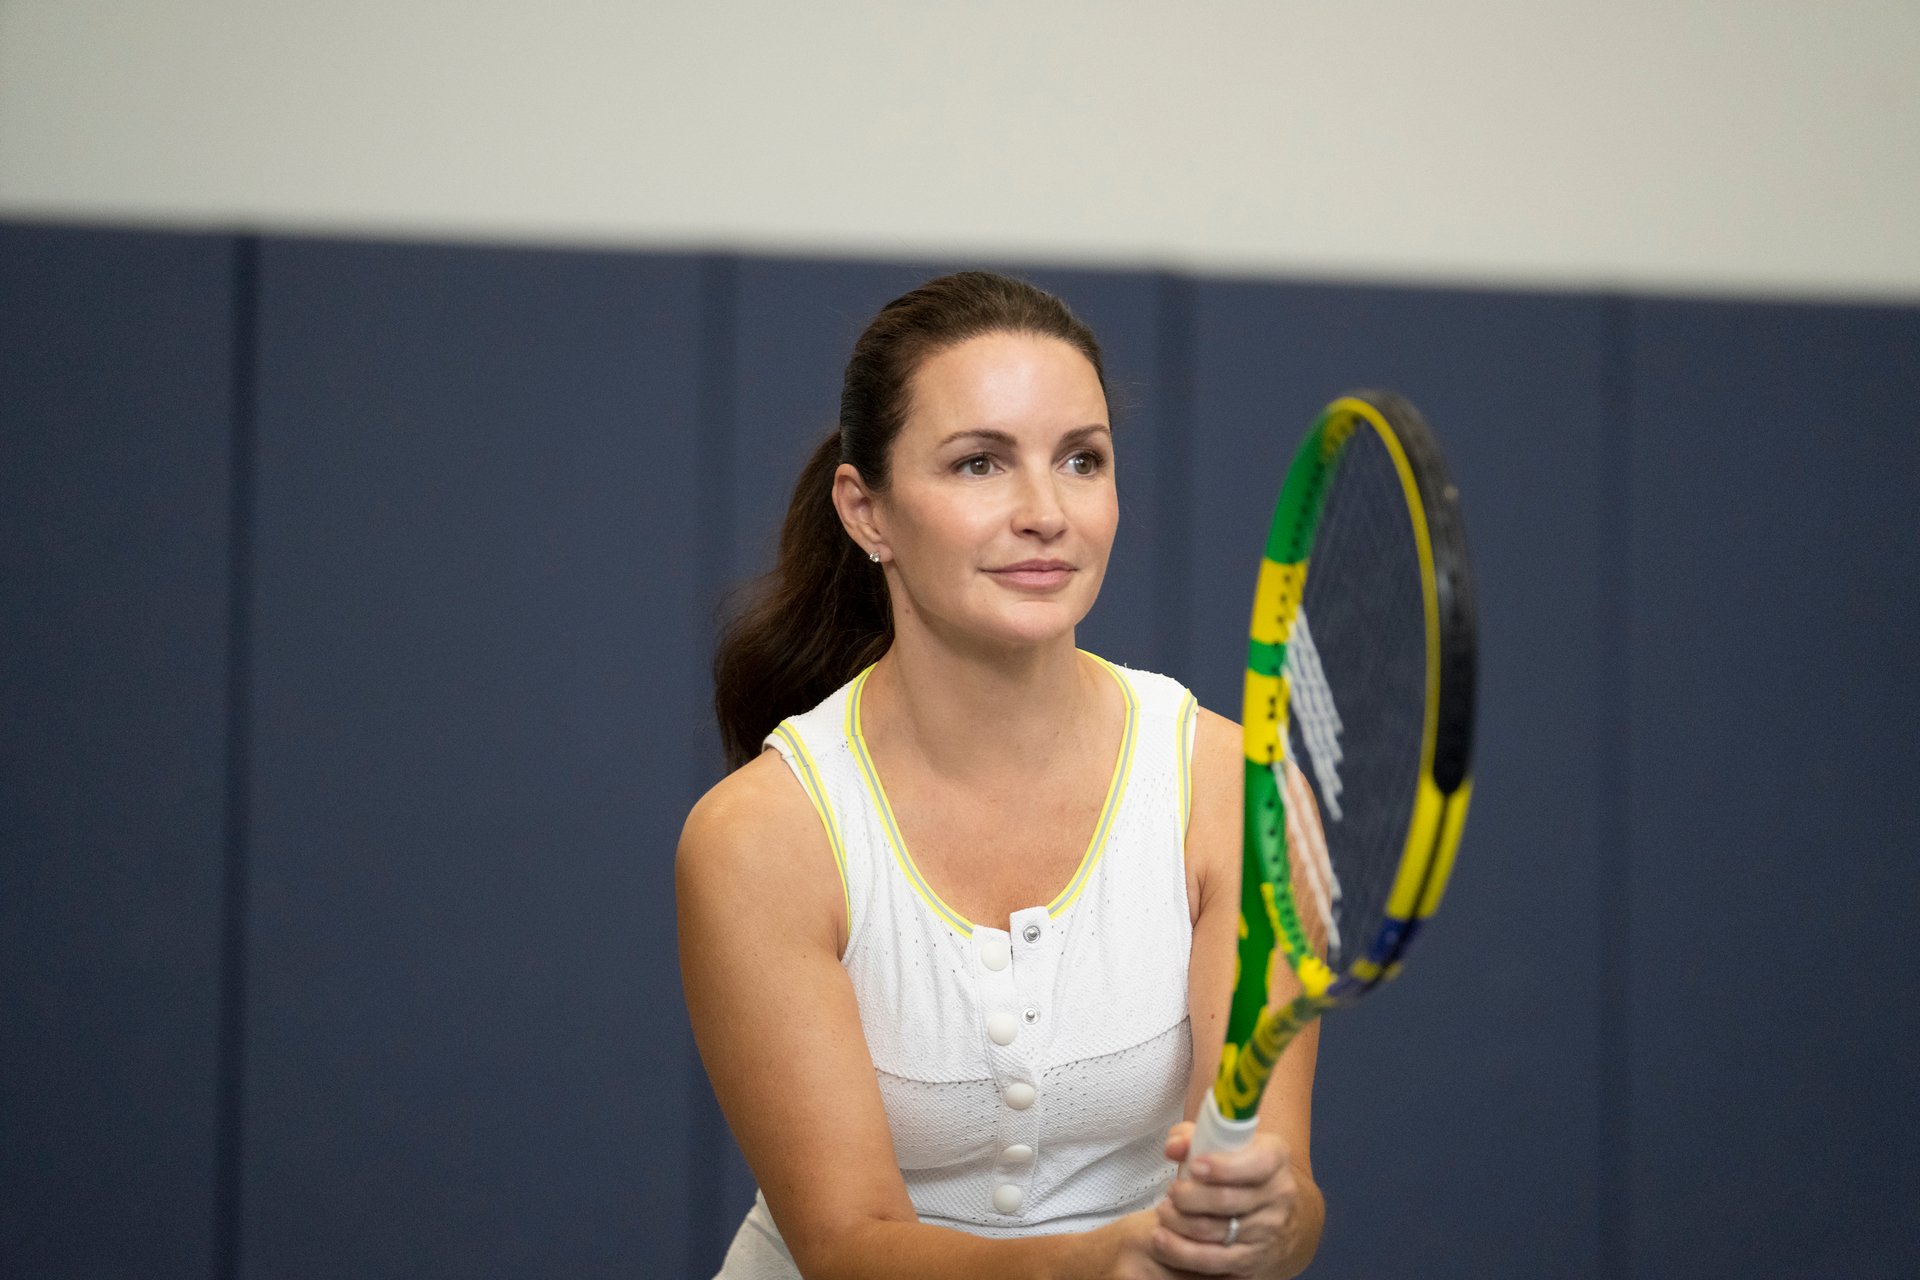 Charlotte York playing tennis in 'And Just Like That...'